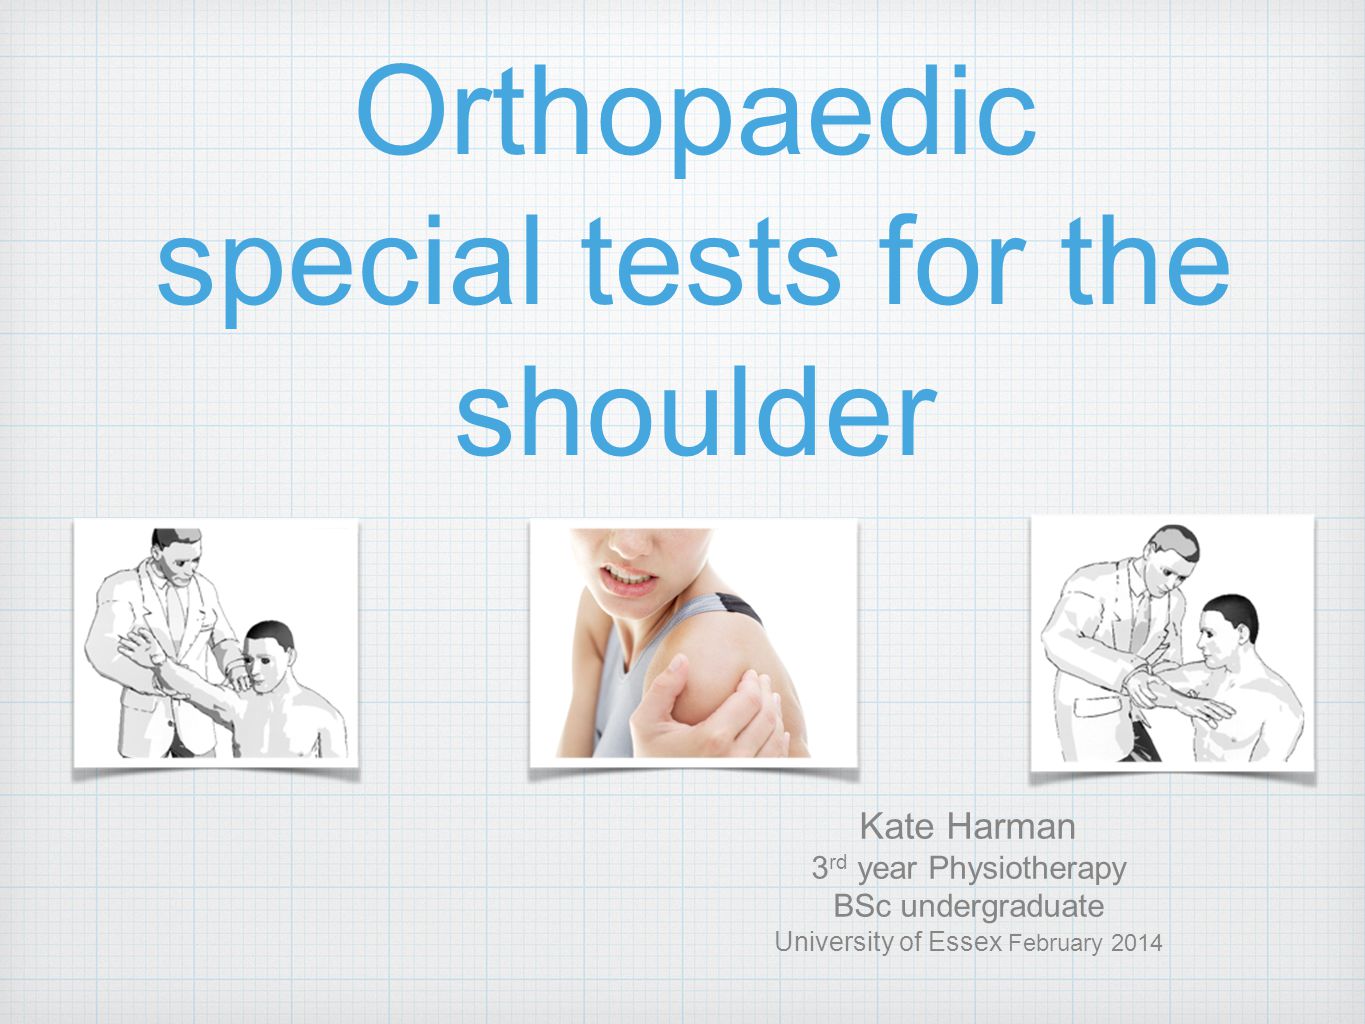 Orthopaedic special tests for the shoulder - ppt video online download